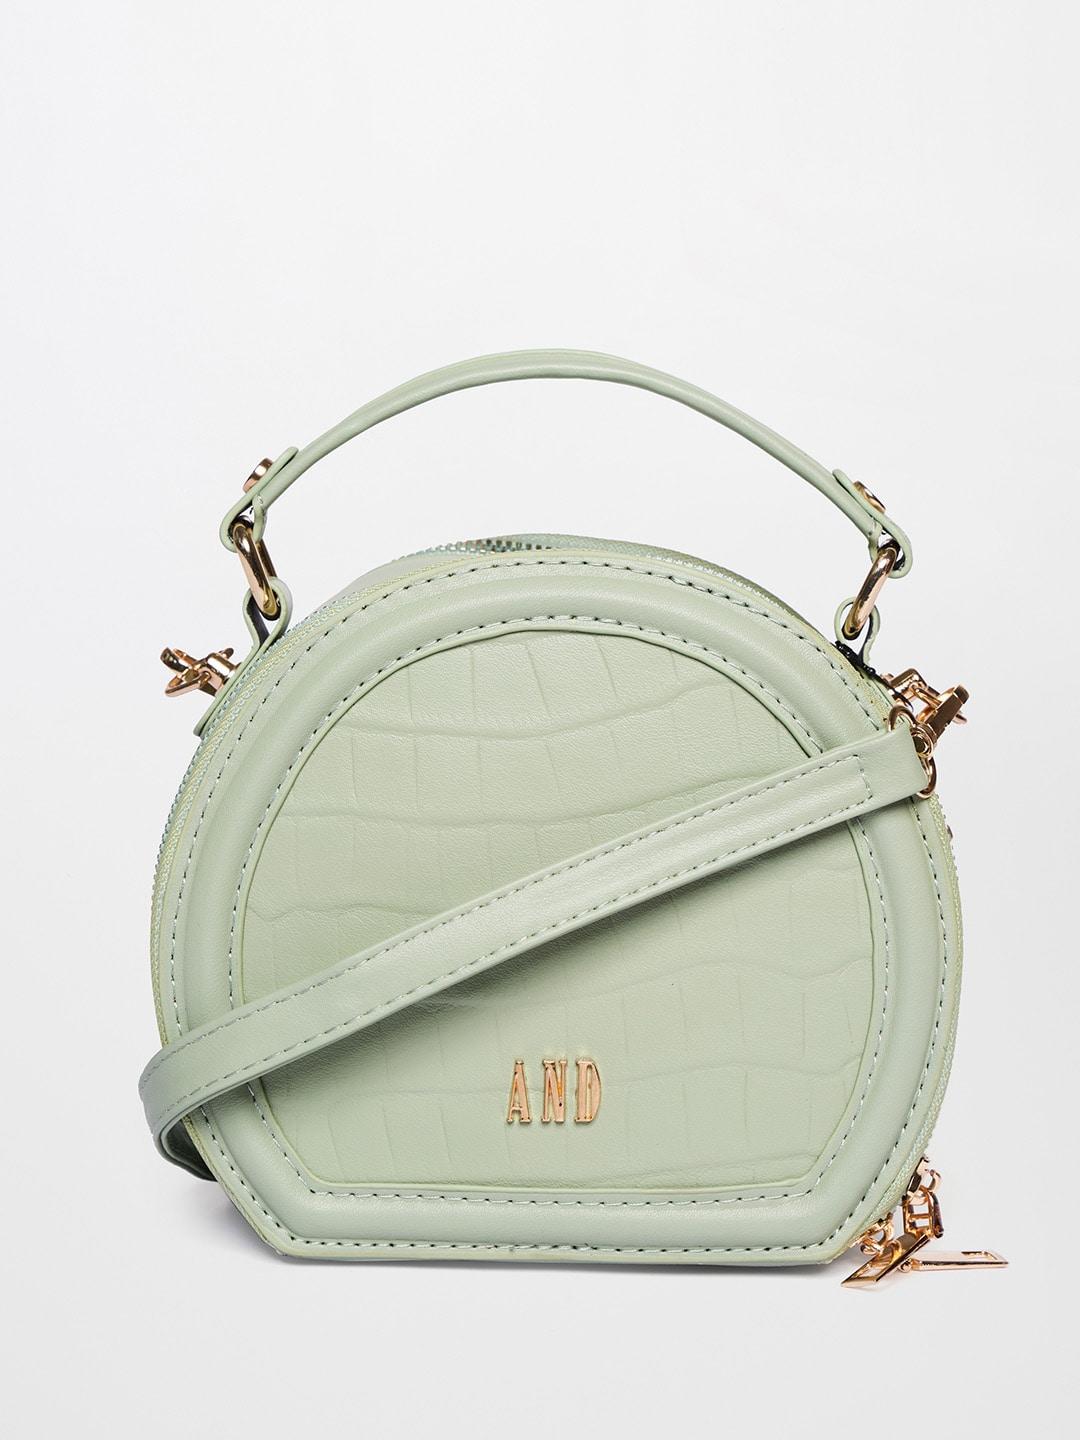 AND Sea Green PU Structured Sling Bag